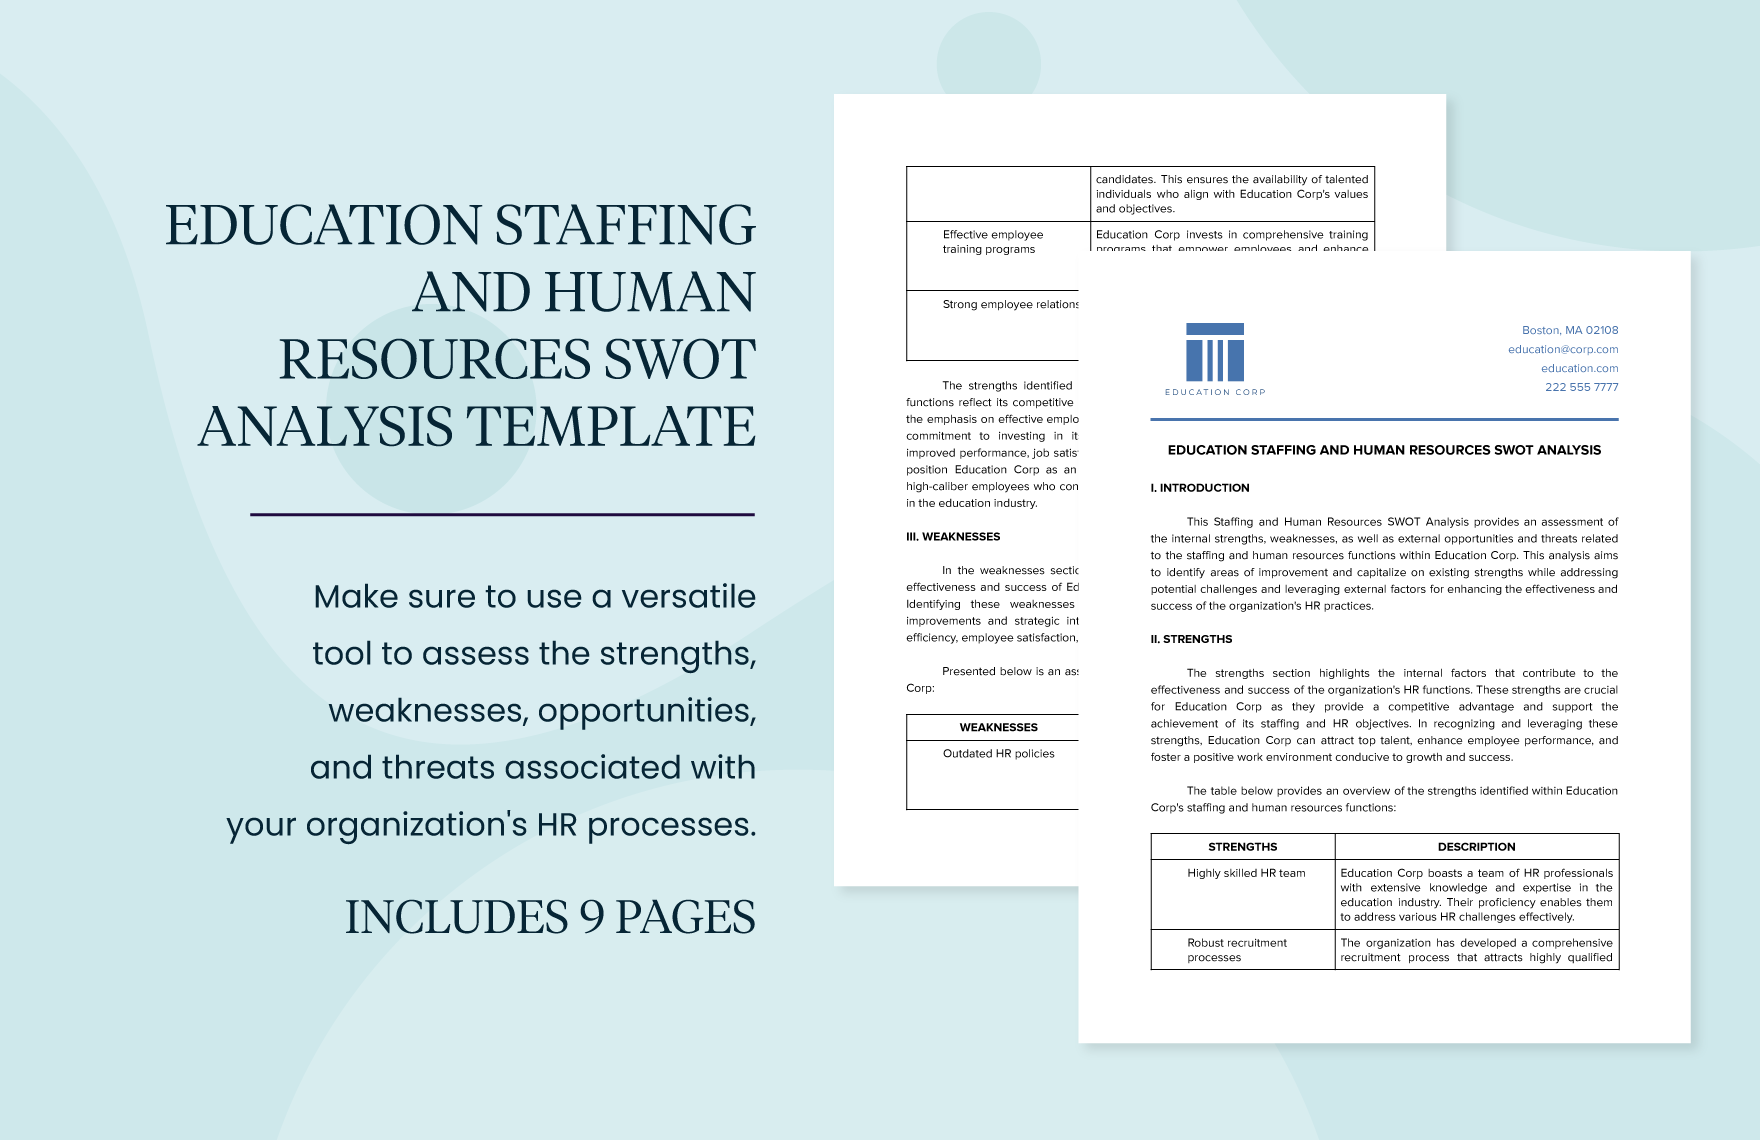 Education Staffing and Human Resources SWOT Analysis Template